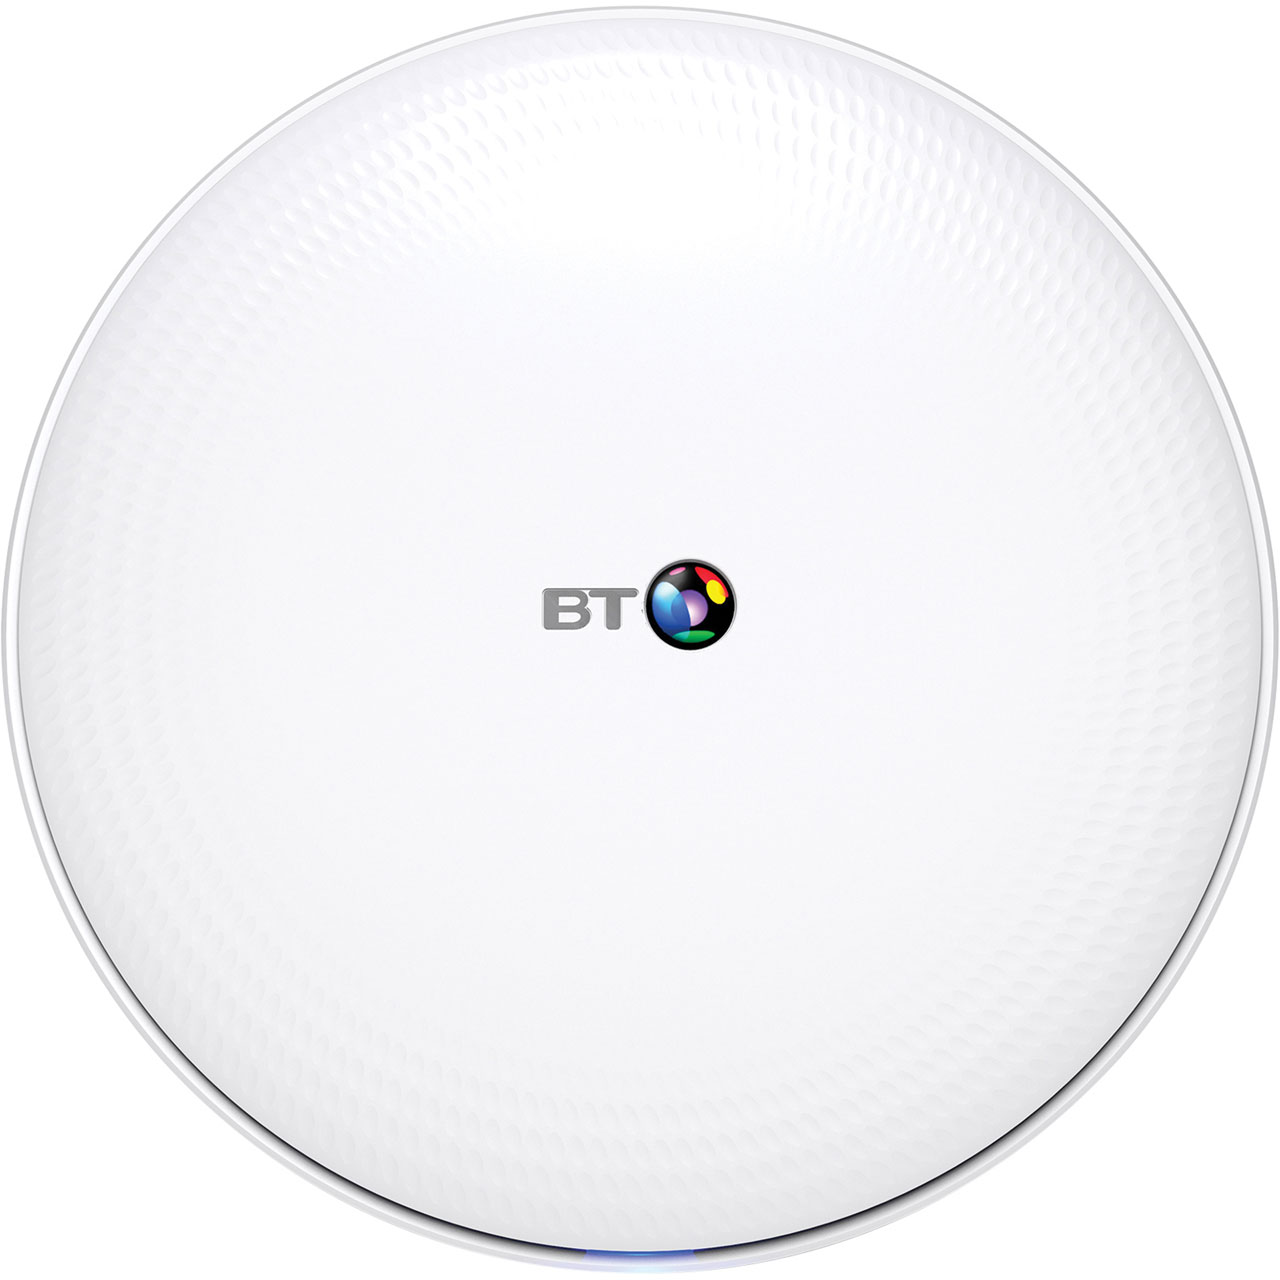 BT Whole Home WiFi (Single Pack) Add on disc for Mesh Network Review